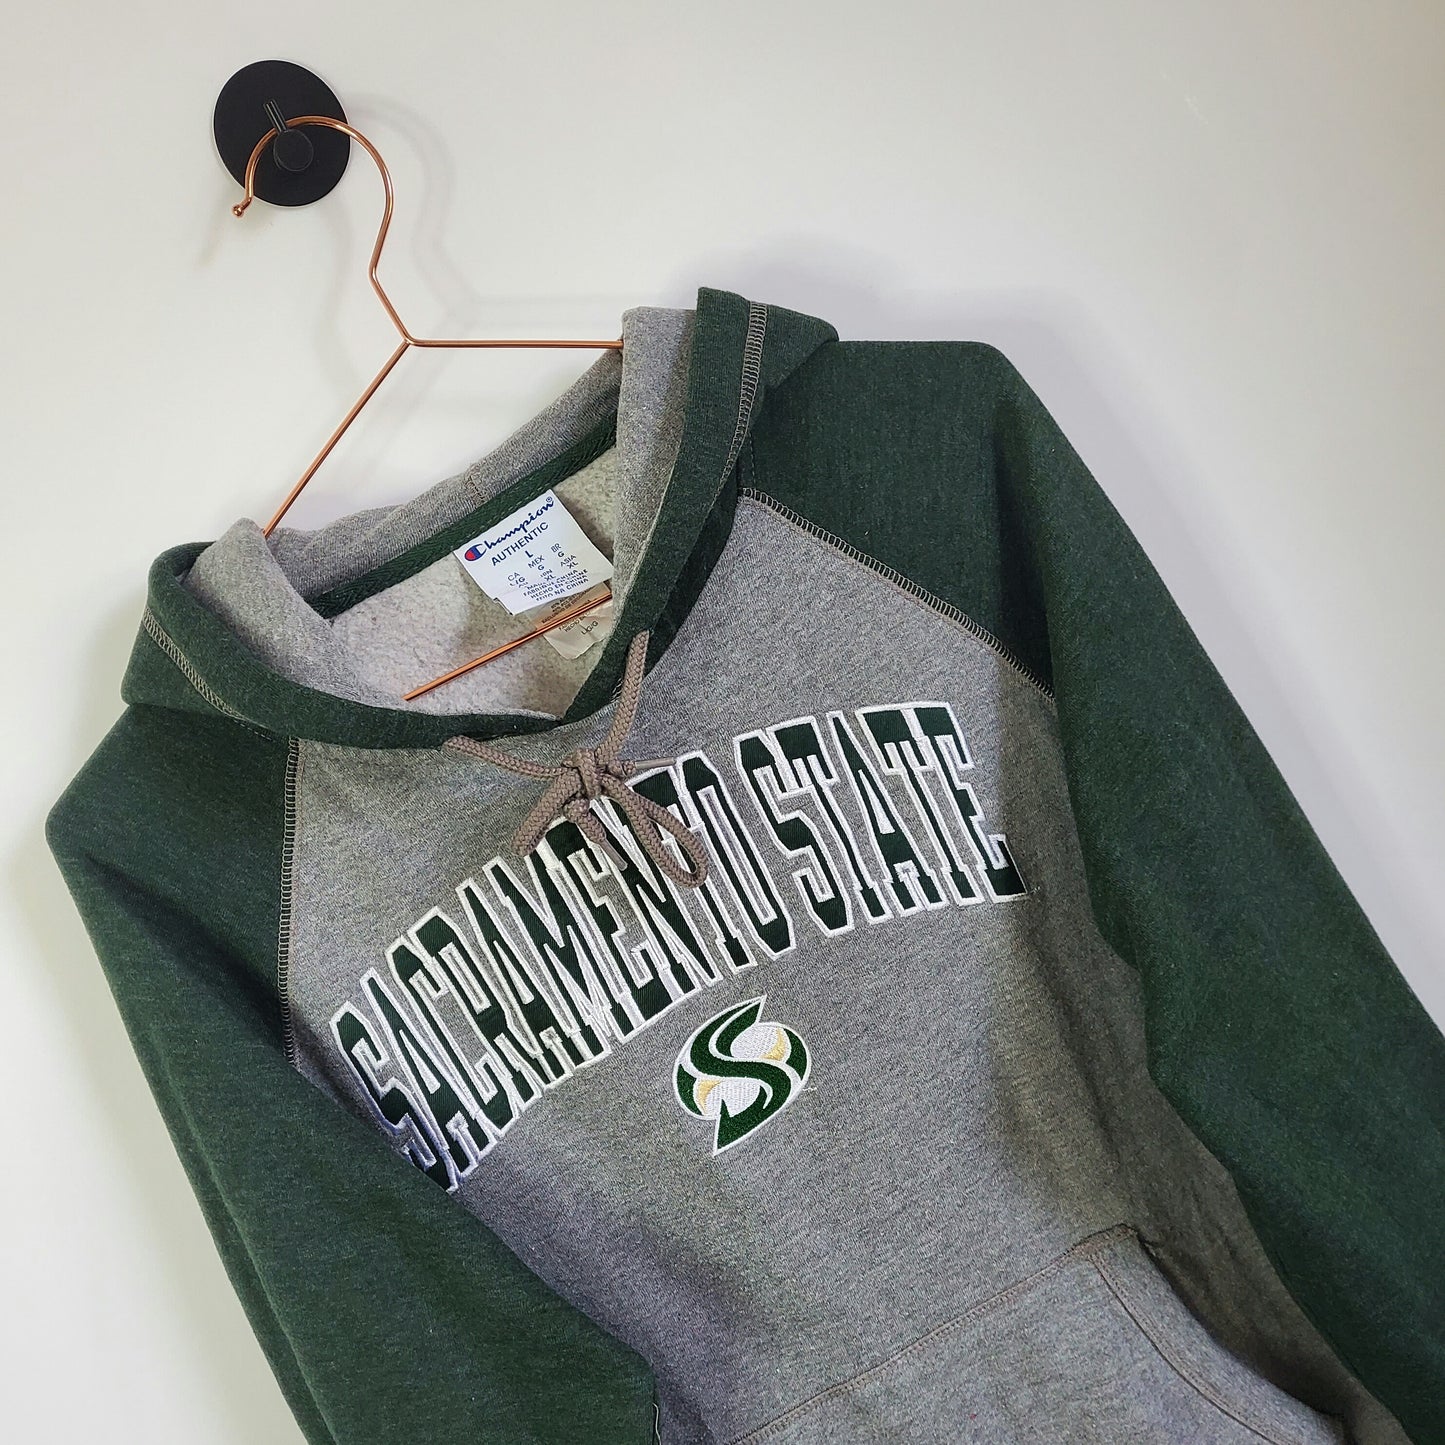 Sacramento State Vintage Champion Hoodie Grey and Green Size L